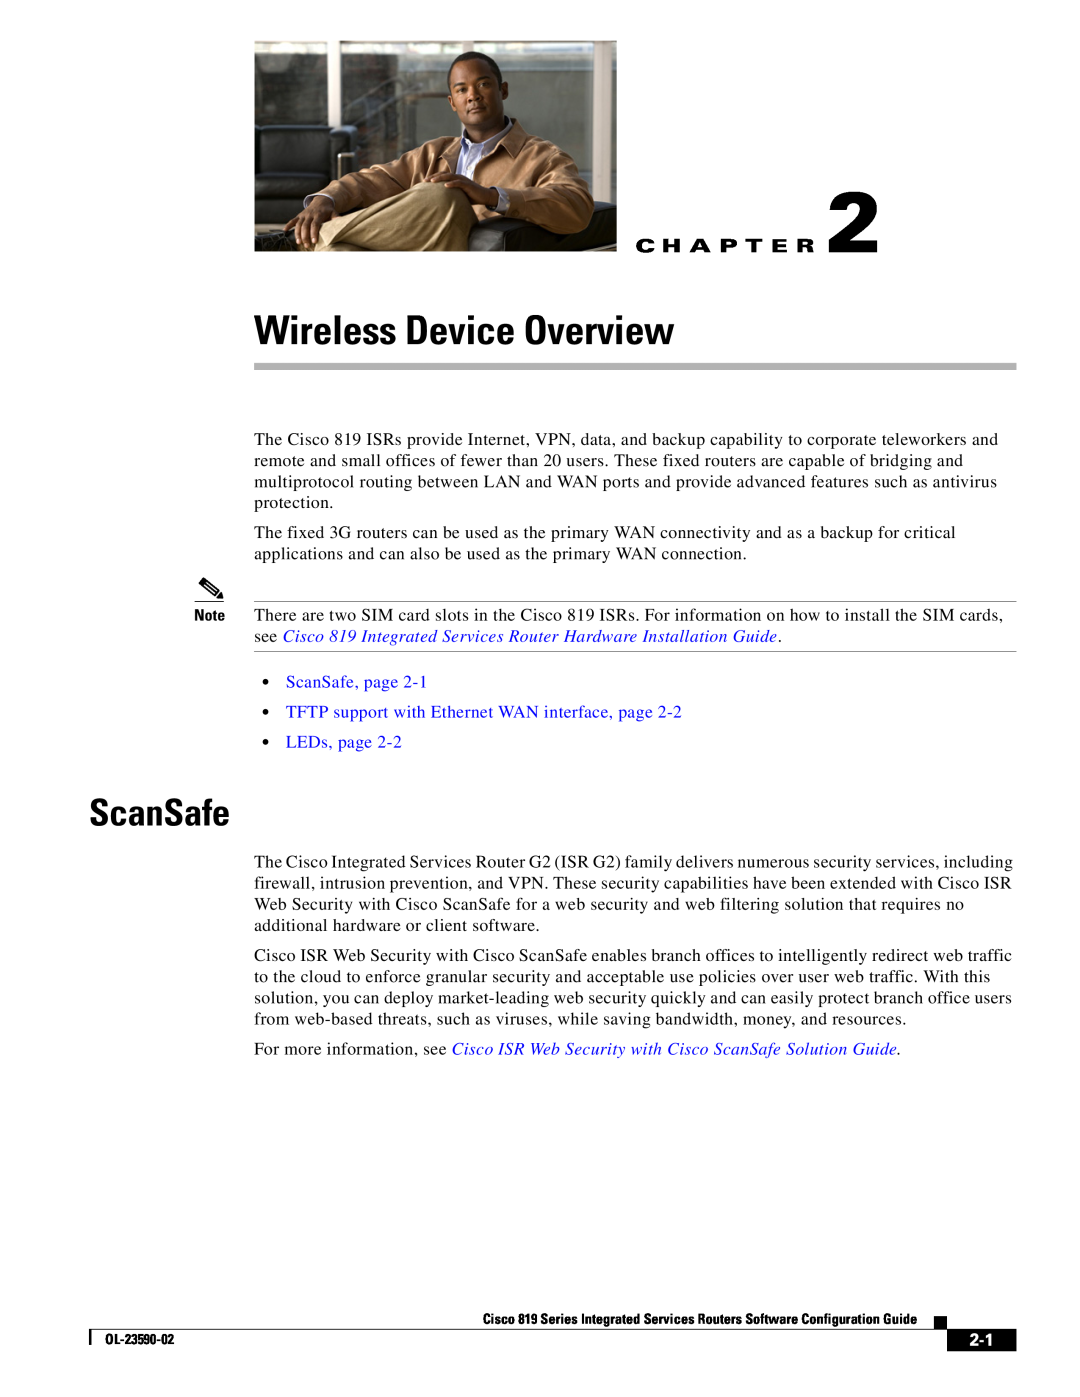 Cisco Systems C819HG4GVK9, C819GUK9 manual Wireless Device Overview, ScanSafe, LEDs, page, C H A P T E R 